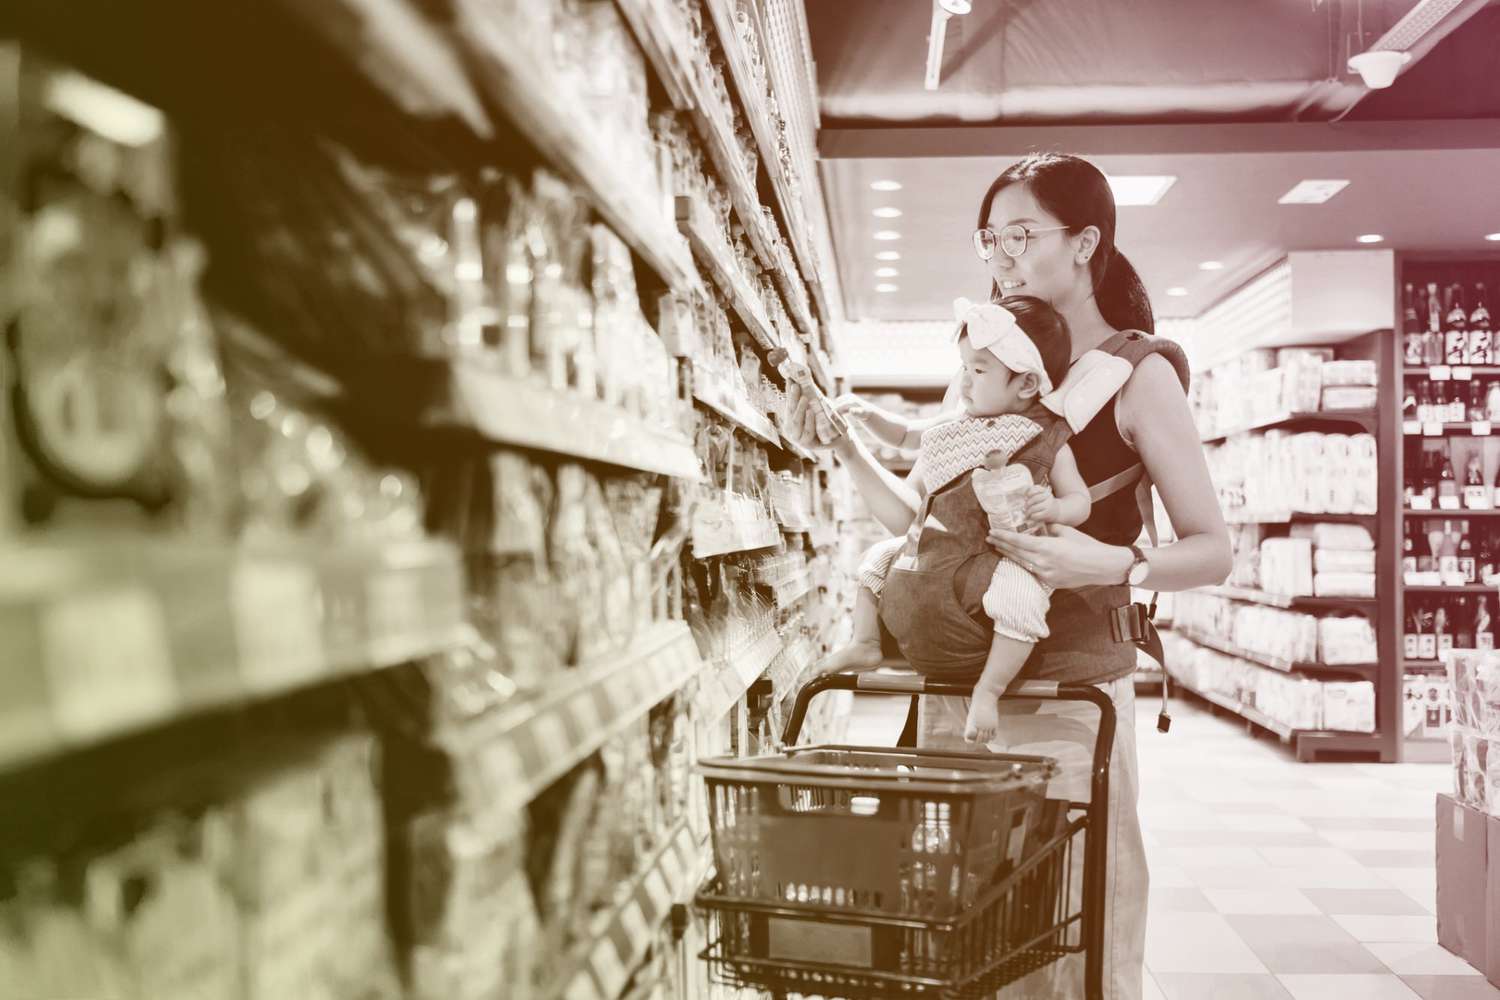 mother grocery shopping with baby girl in supermarket